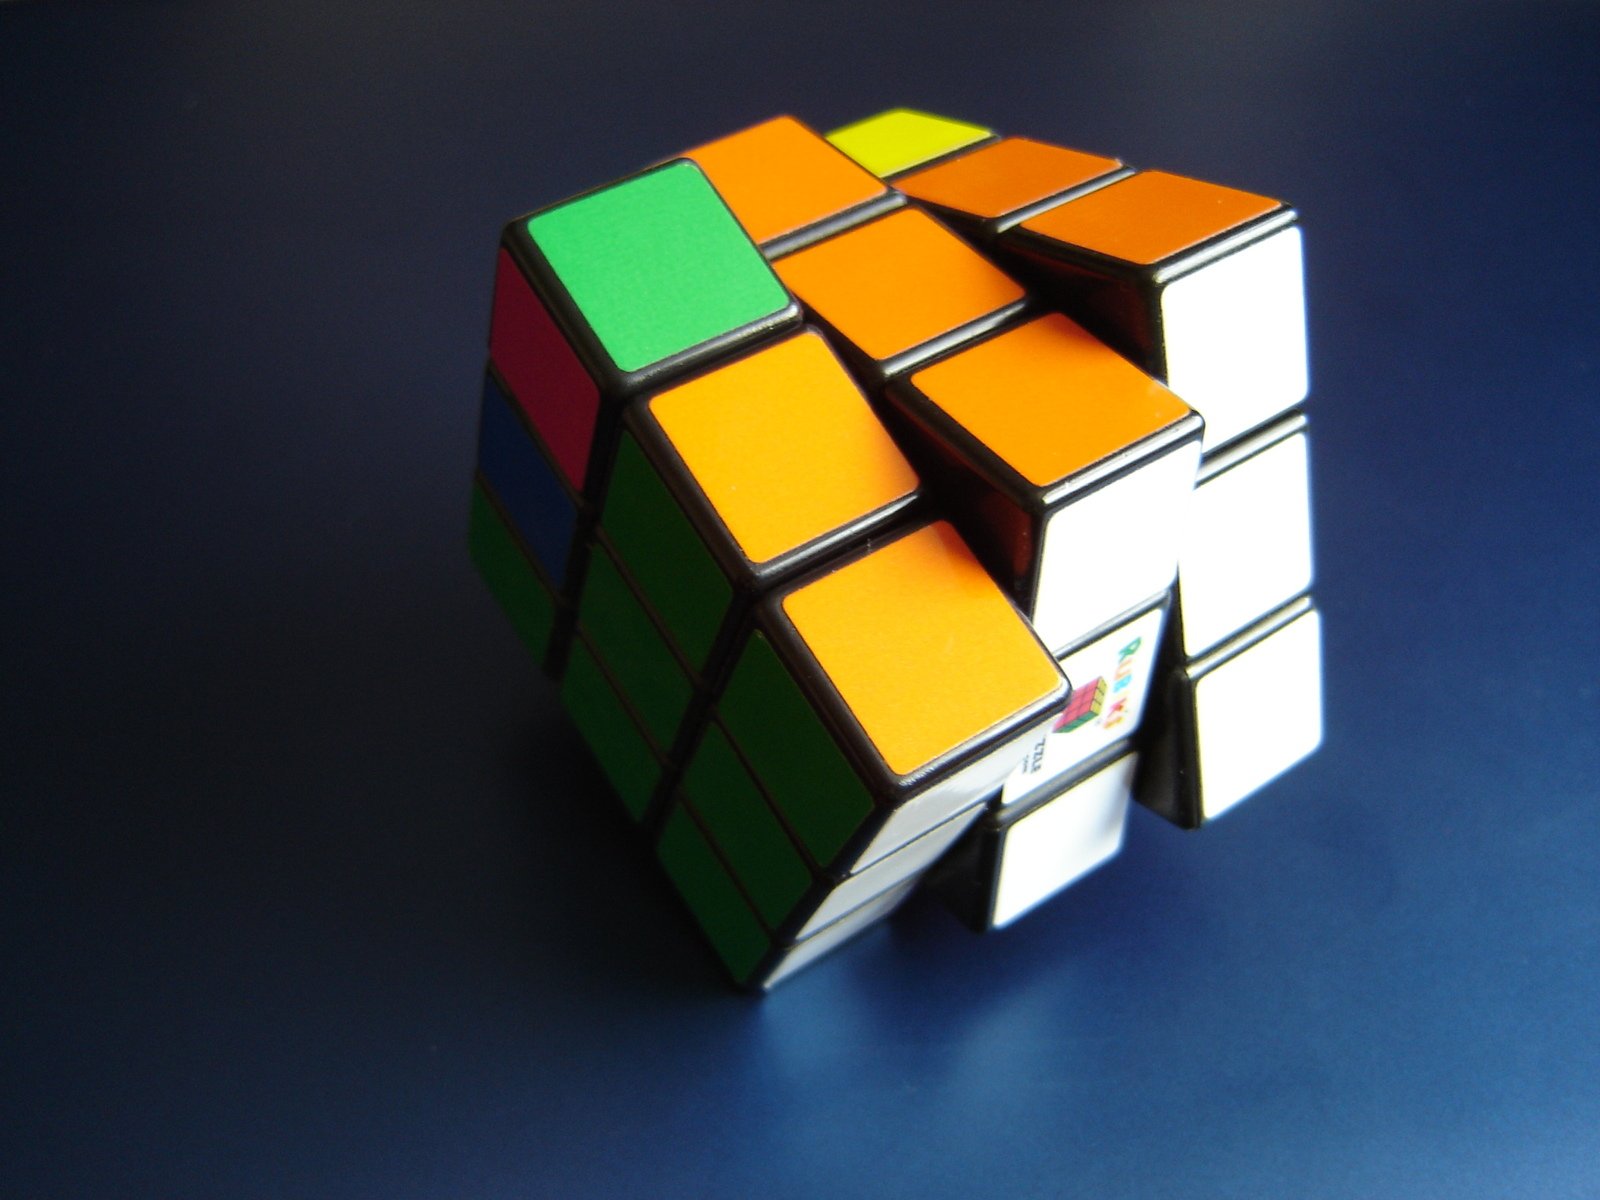 a 3d, multi - colored rubel cube on a table